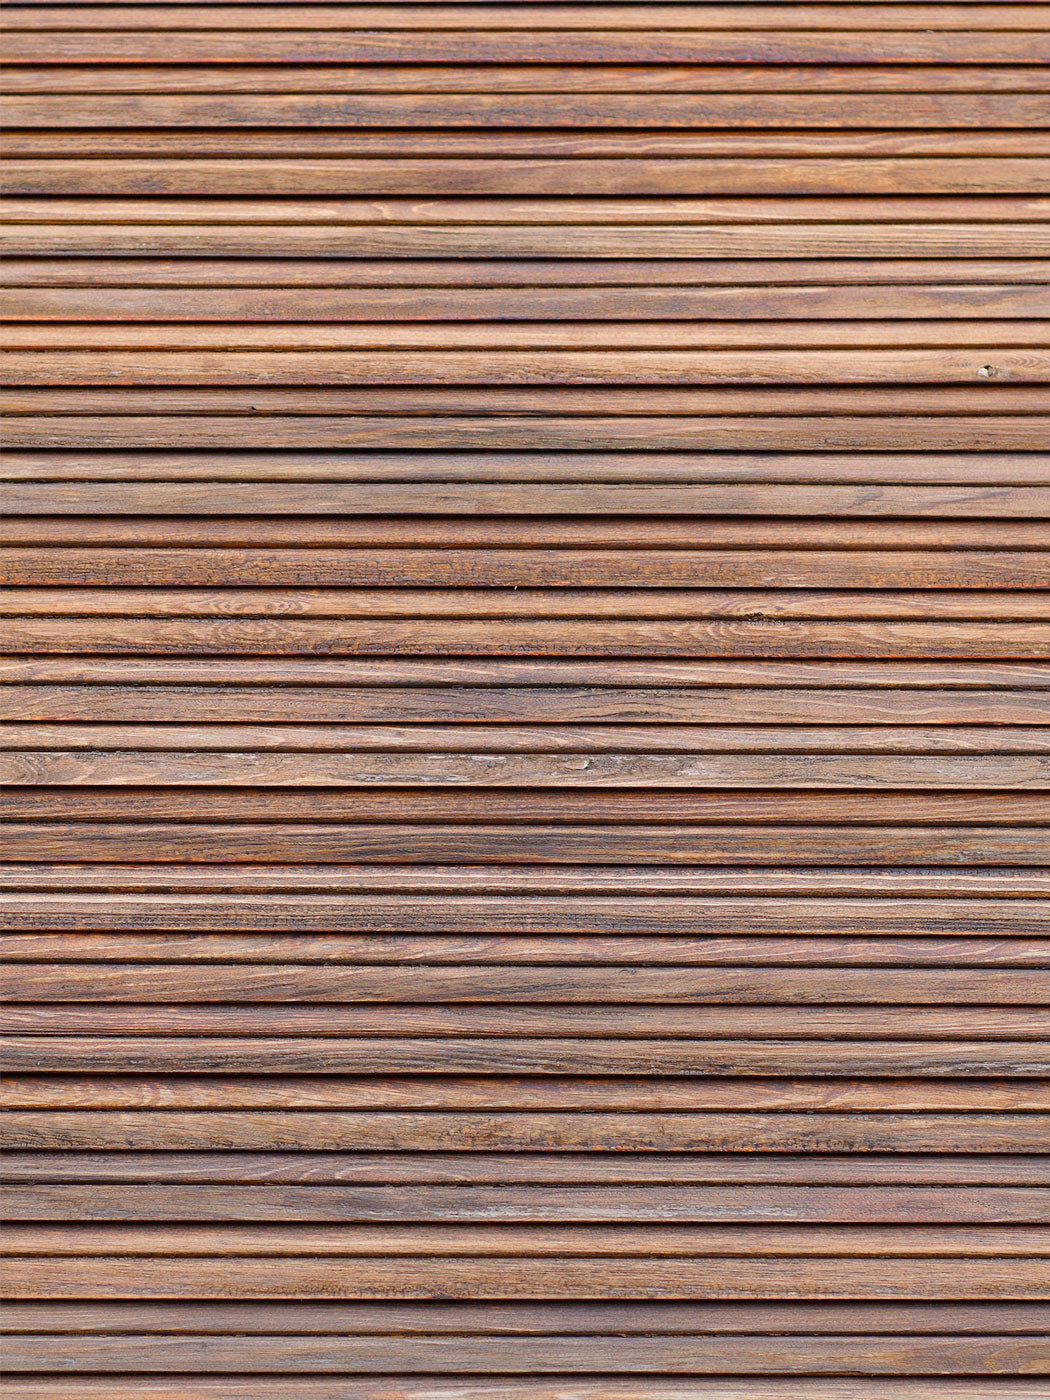 Striped wood texture Wall Mural